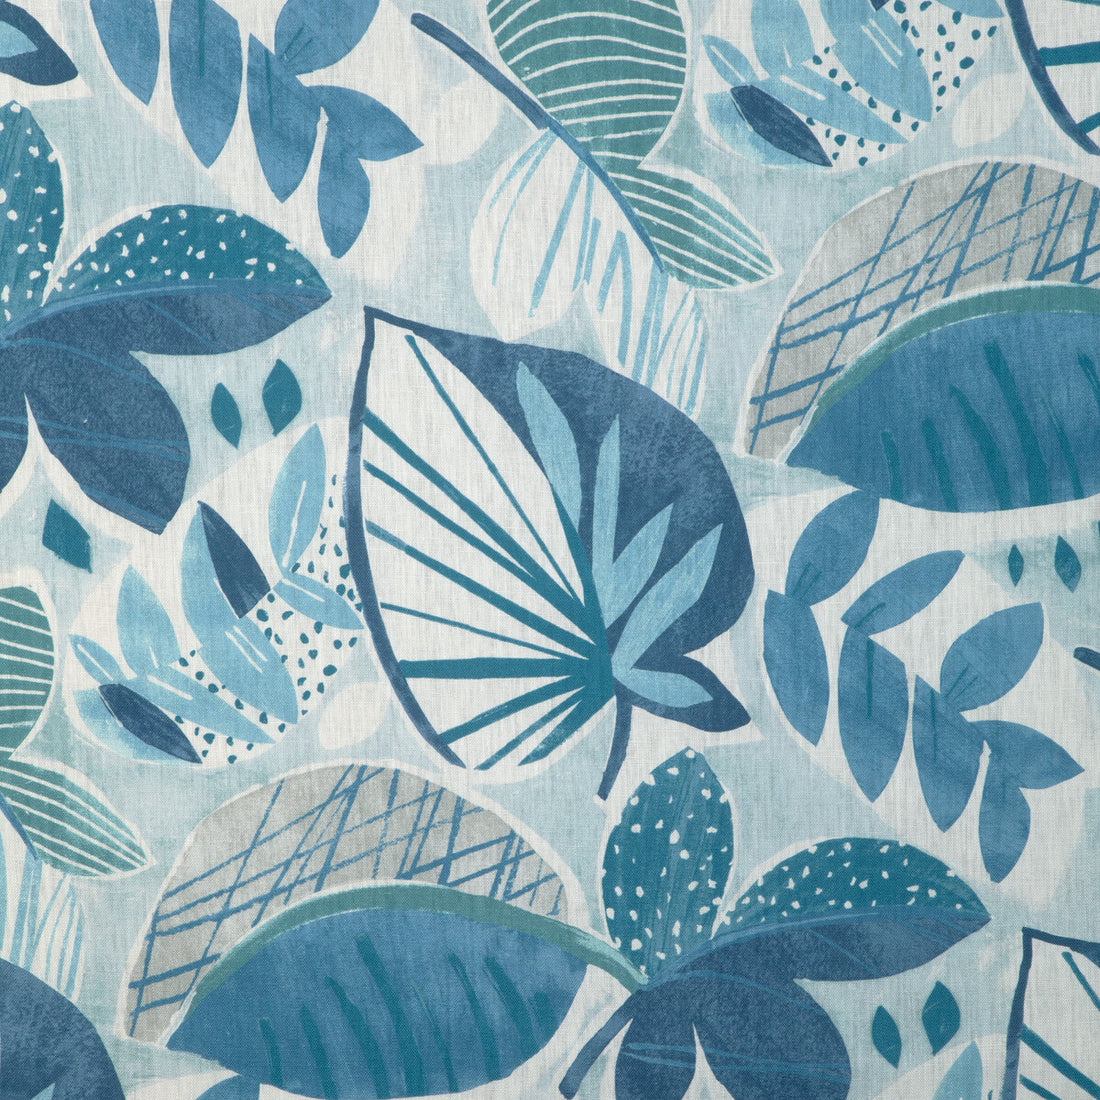 Leaf-A-Lot fabric in ocean color - pattern LEAF-A-LOT.5.0 - by Kravet Basics in the Mid-Century Modern collection